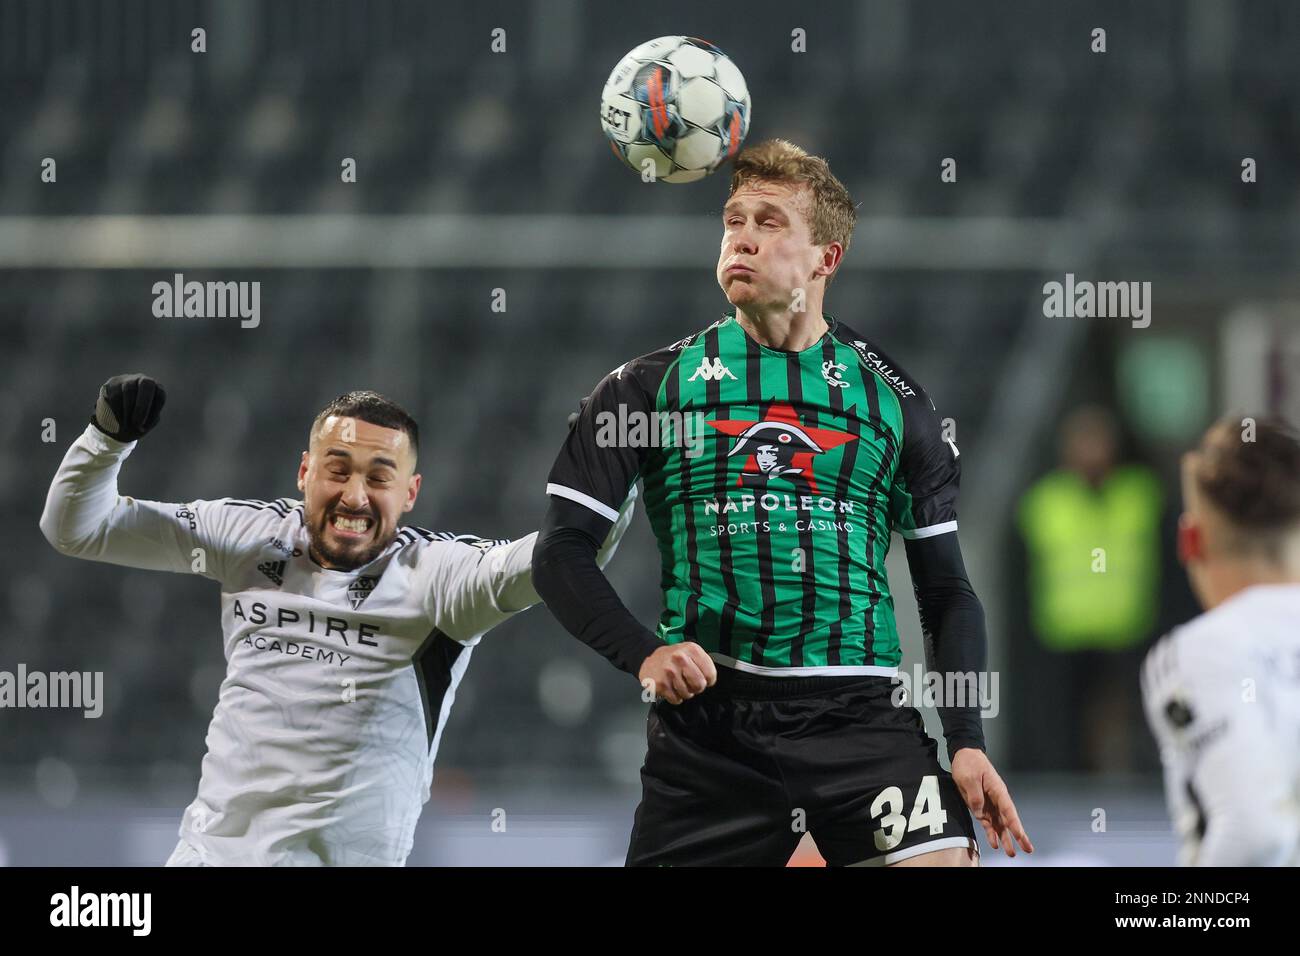 Eupen's Jason Davidson and Cercle's Thibo Somers fight for the ball during a soccer match between KAS Eupen and Cercle Brugge, Saturday 25 February 2023 in Eupen, on day 27 of the 2022-2023 'Jupiler Pro League' first division of the Belgian championship. BELGA PHOTO BRUNO FAHY Stock Photo